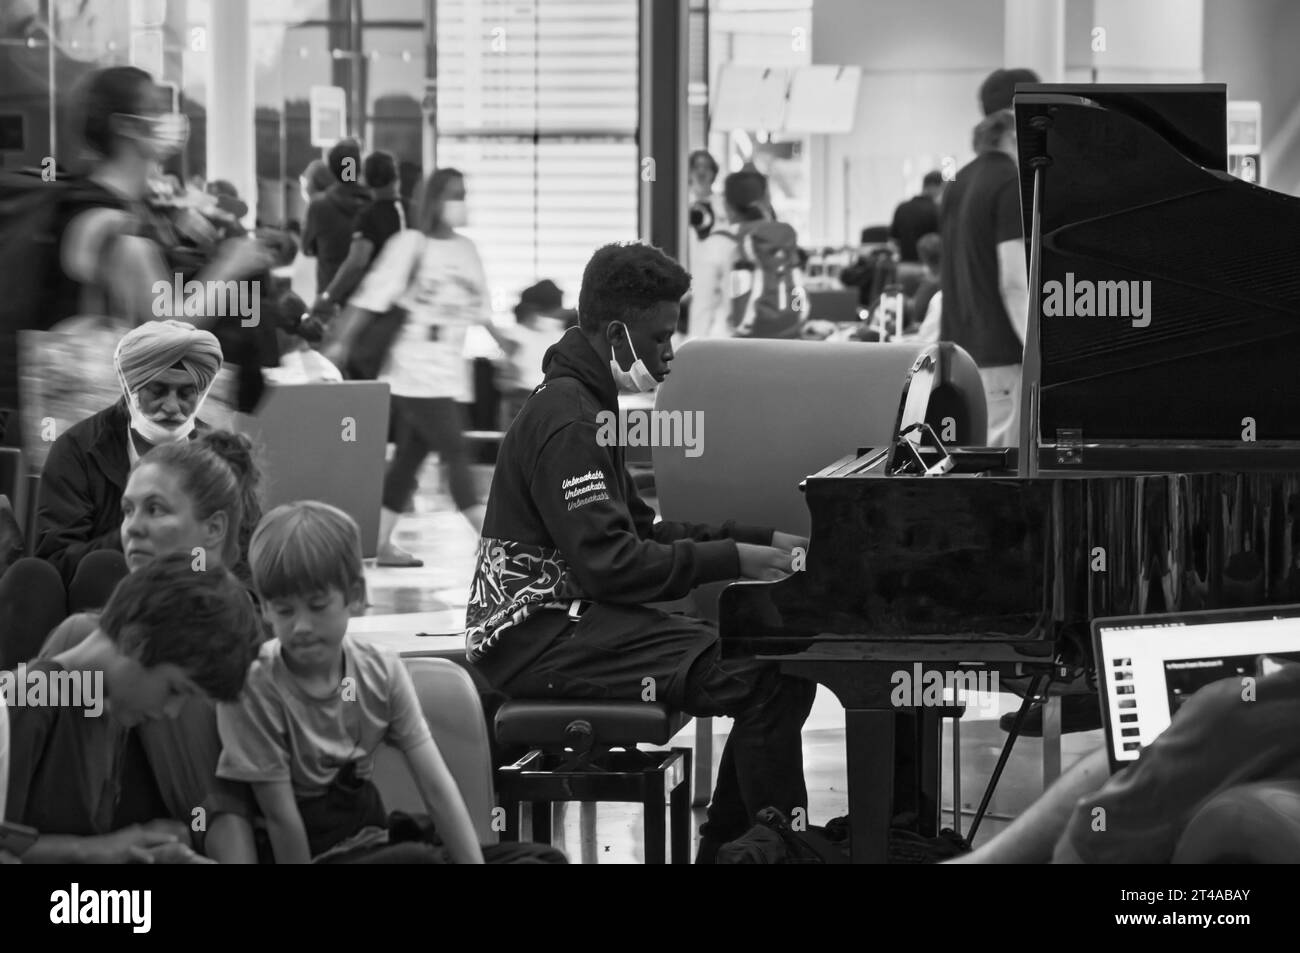 Montreal, Quebec, Canada - 07 04 2022: A teenage musician wearing black Unbreakable hoodie playing black grand piano amid crowded busy outbound Stock Photo